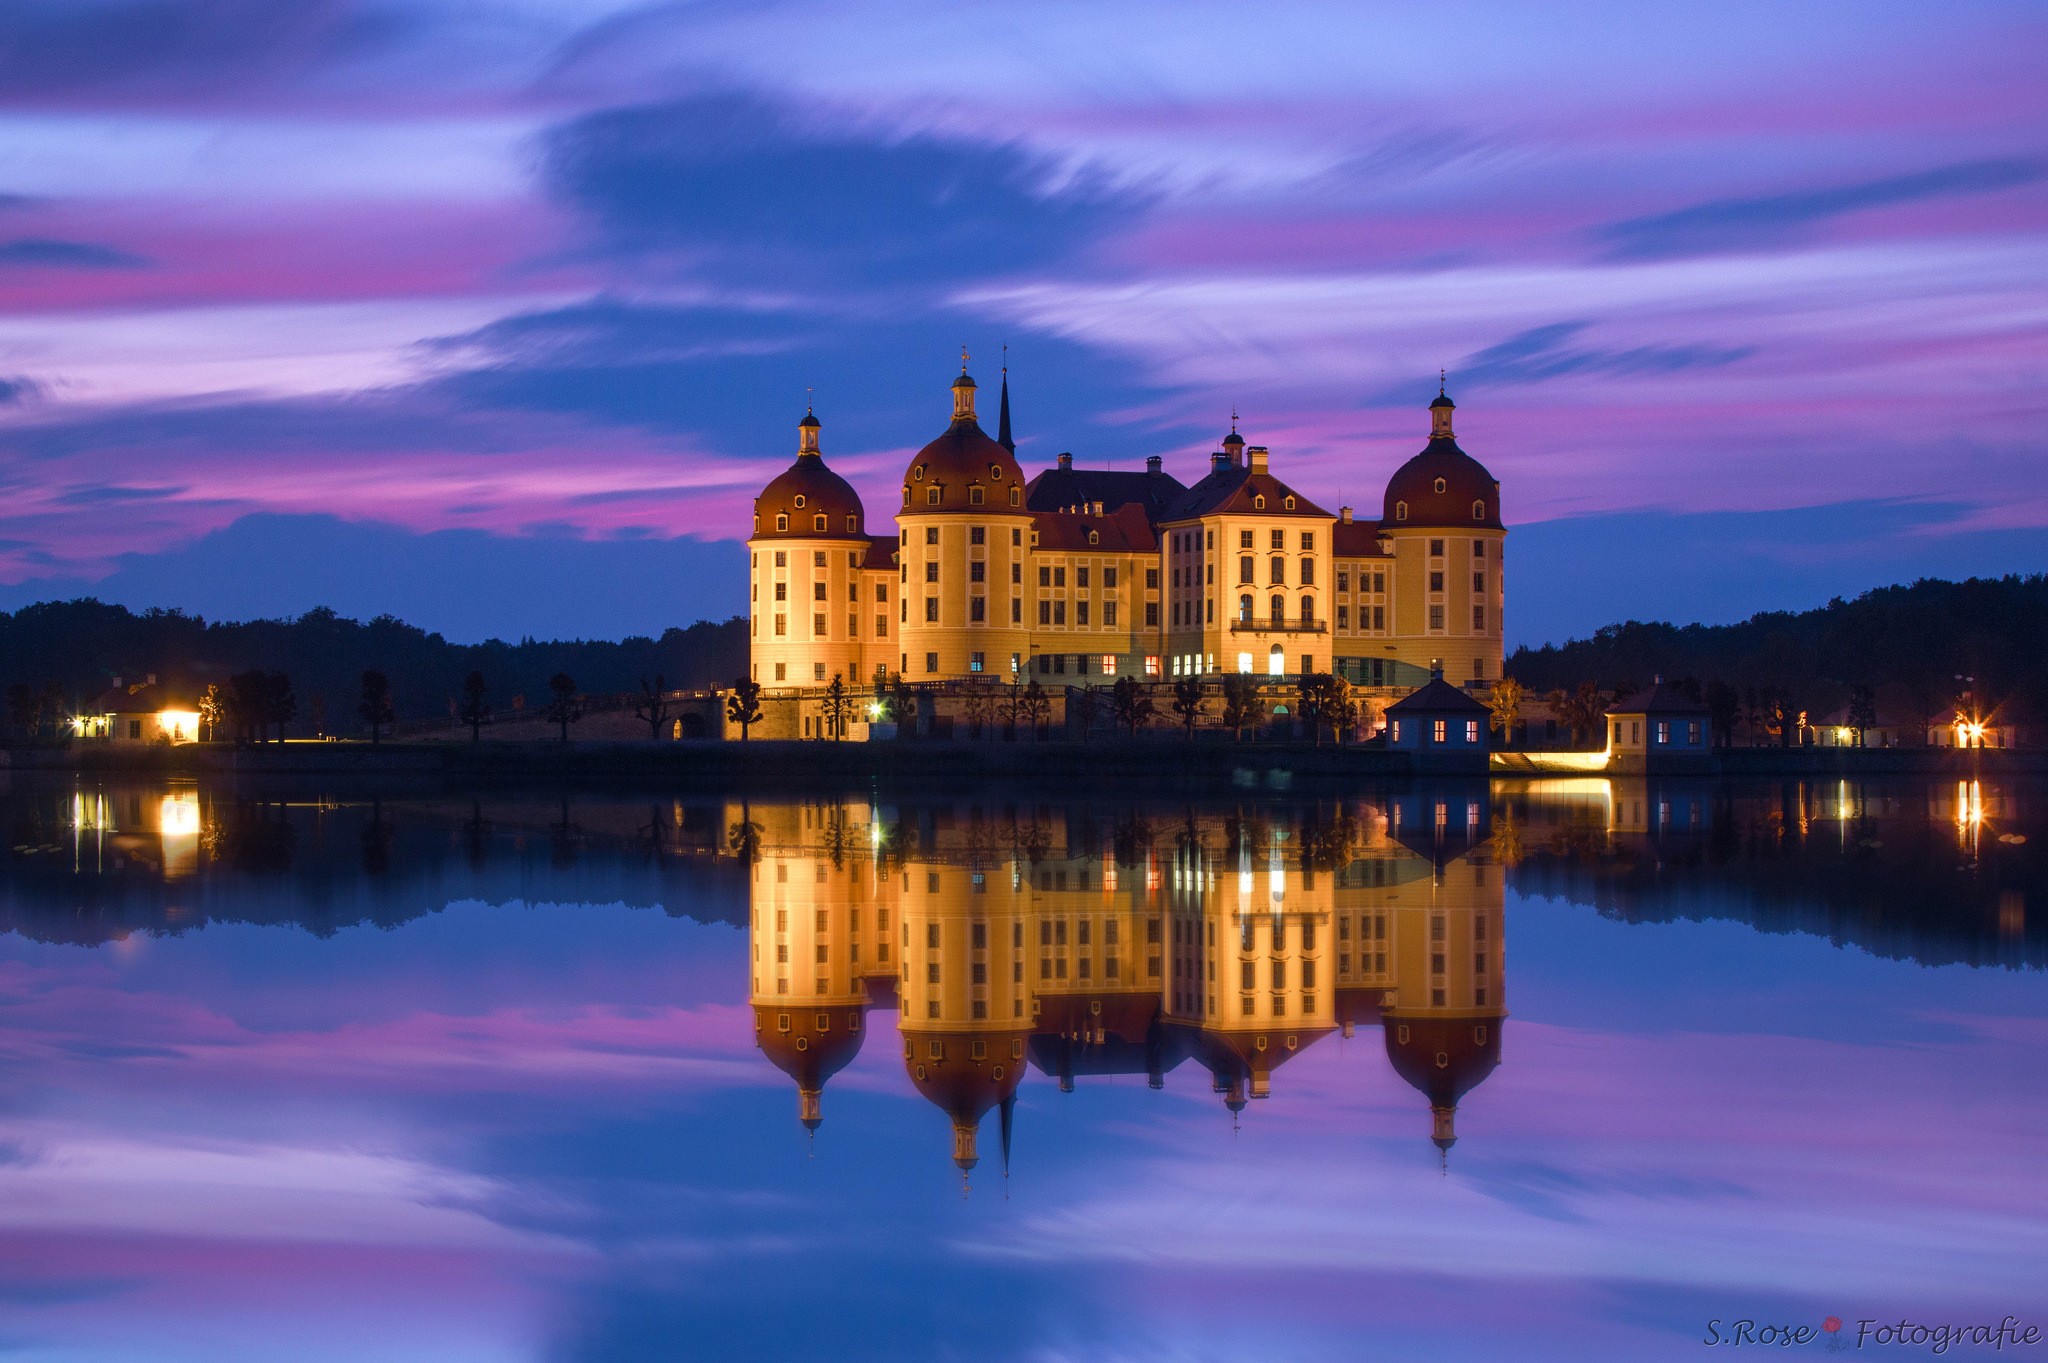 General 2048x1363 architecture lake trees castle Germany night lights reflection long exposure clouds house Moritzburg Castle